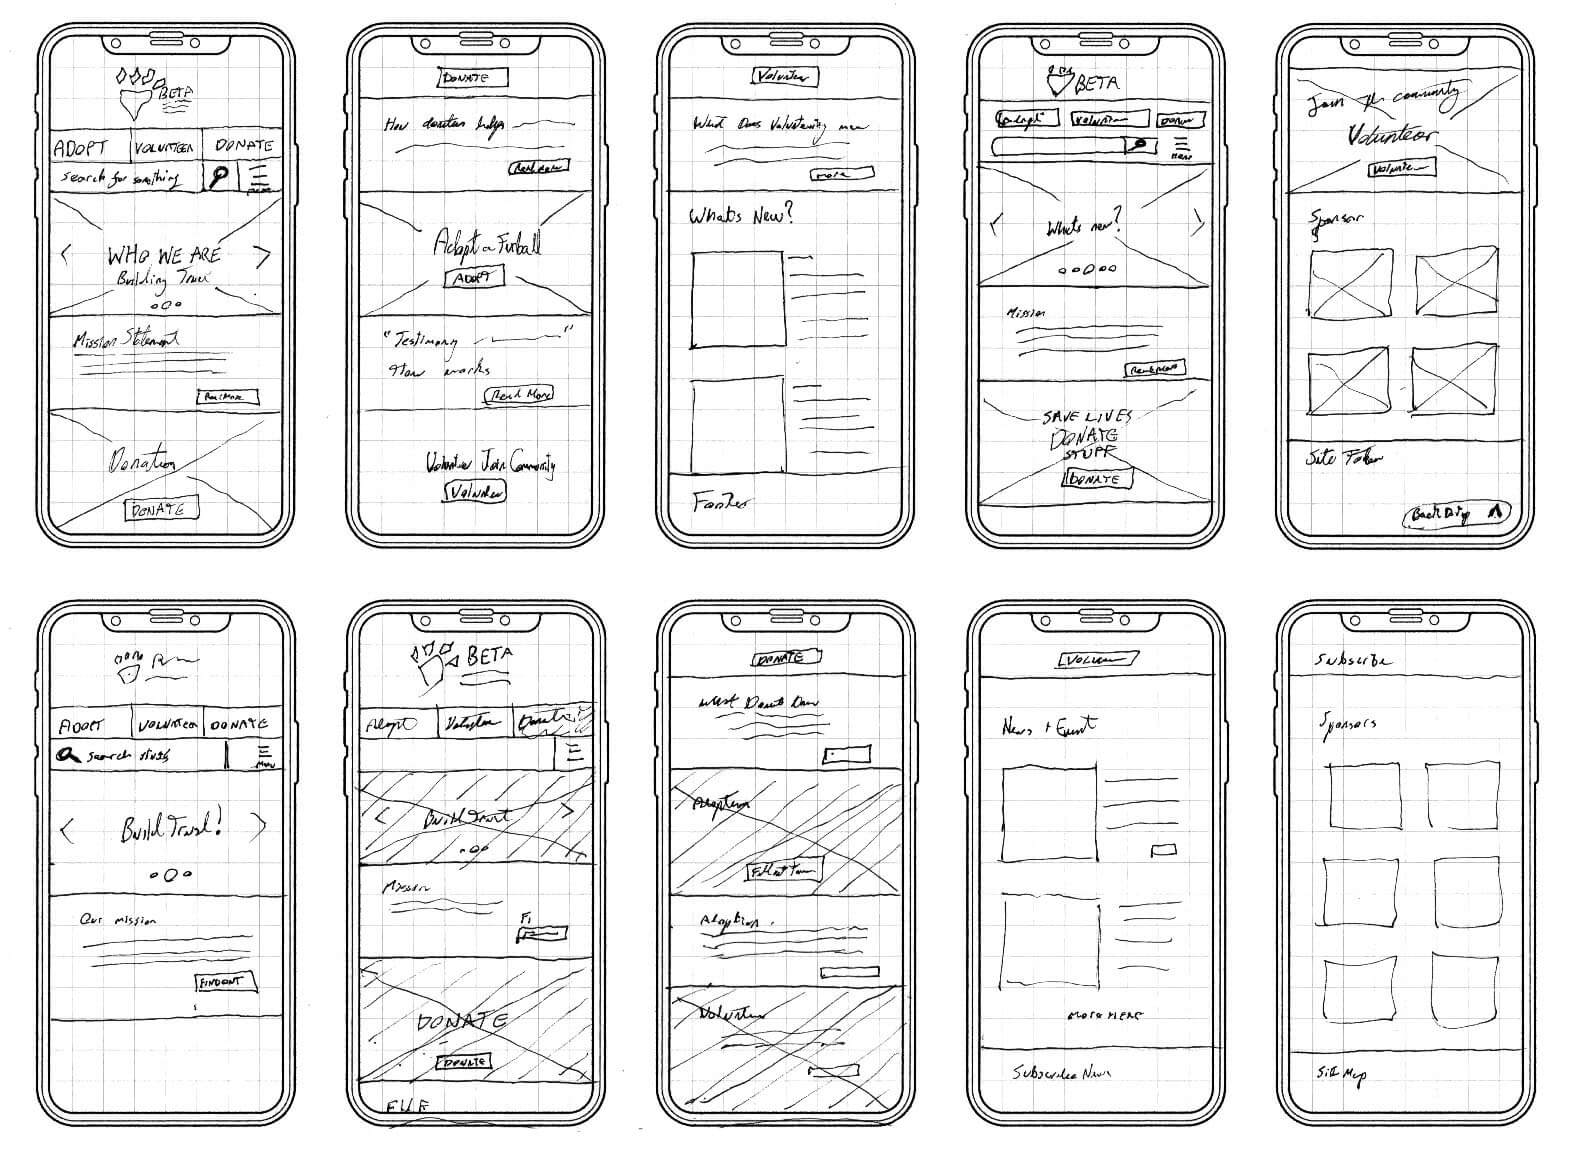 A series of preliminary wireframes drawn by hand that were part of the UX design development phase